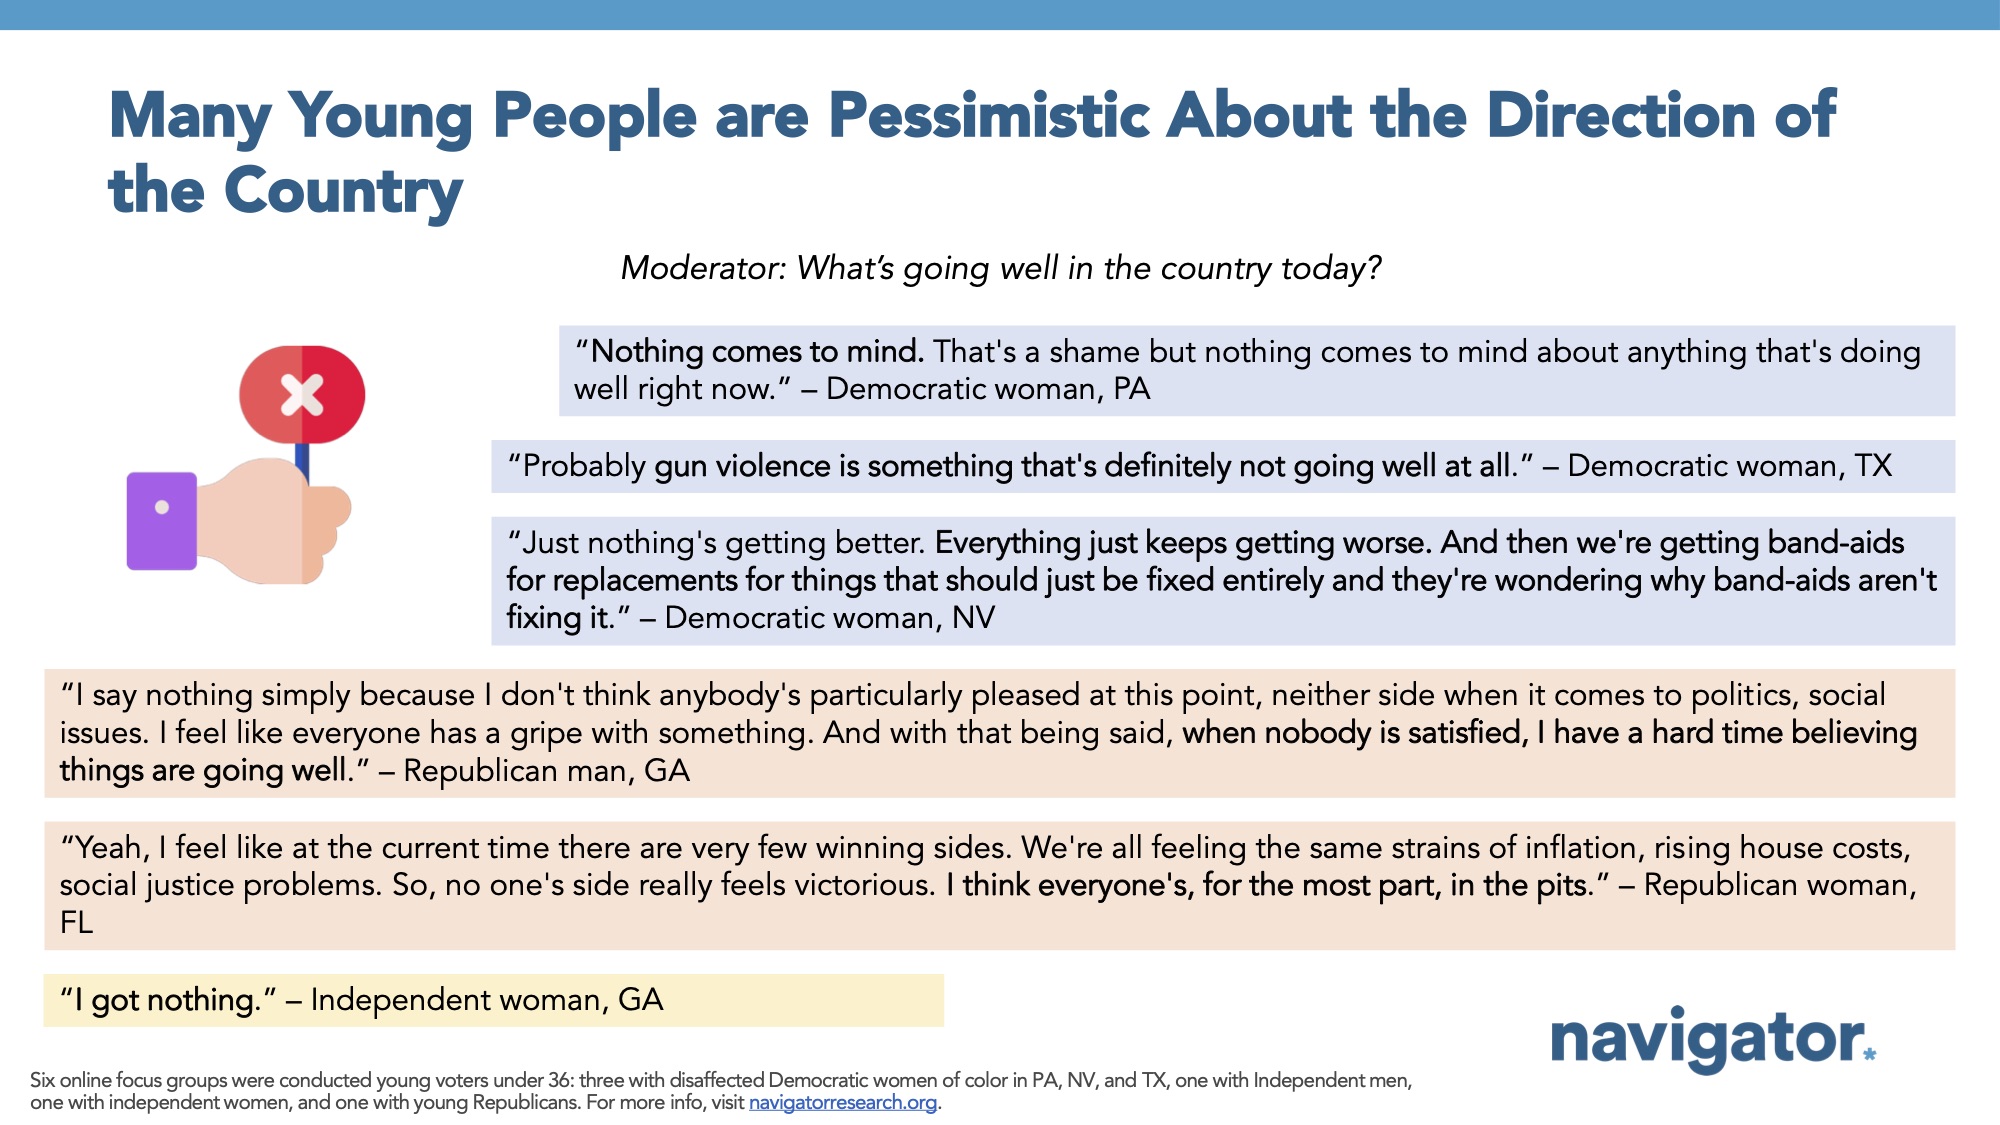 Focus group report slide titled: Many Young People are Pessimistic About the Direction of the Country